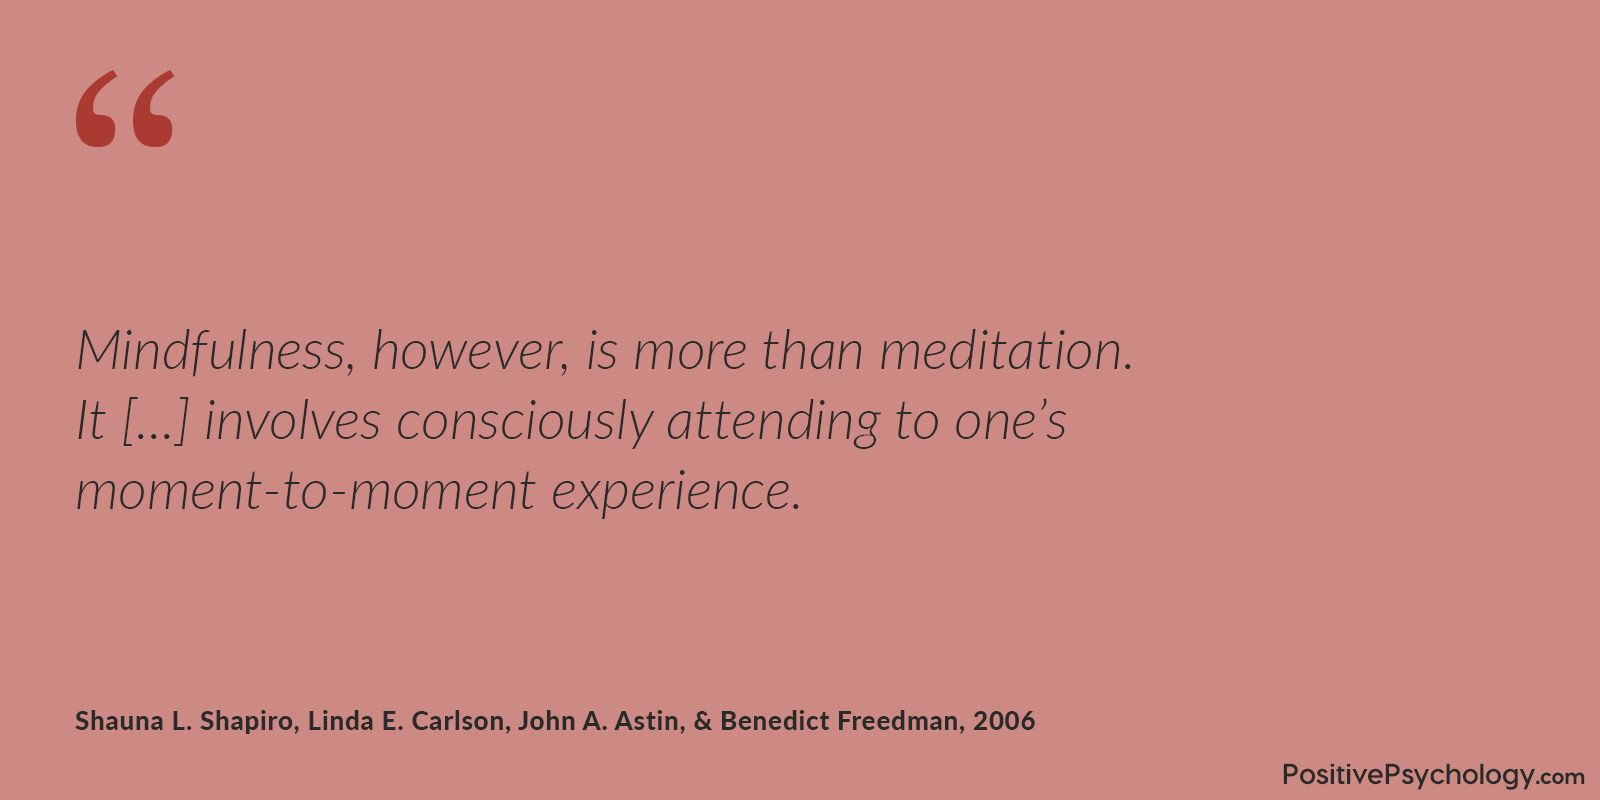 Mindfulness is more than meditation